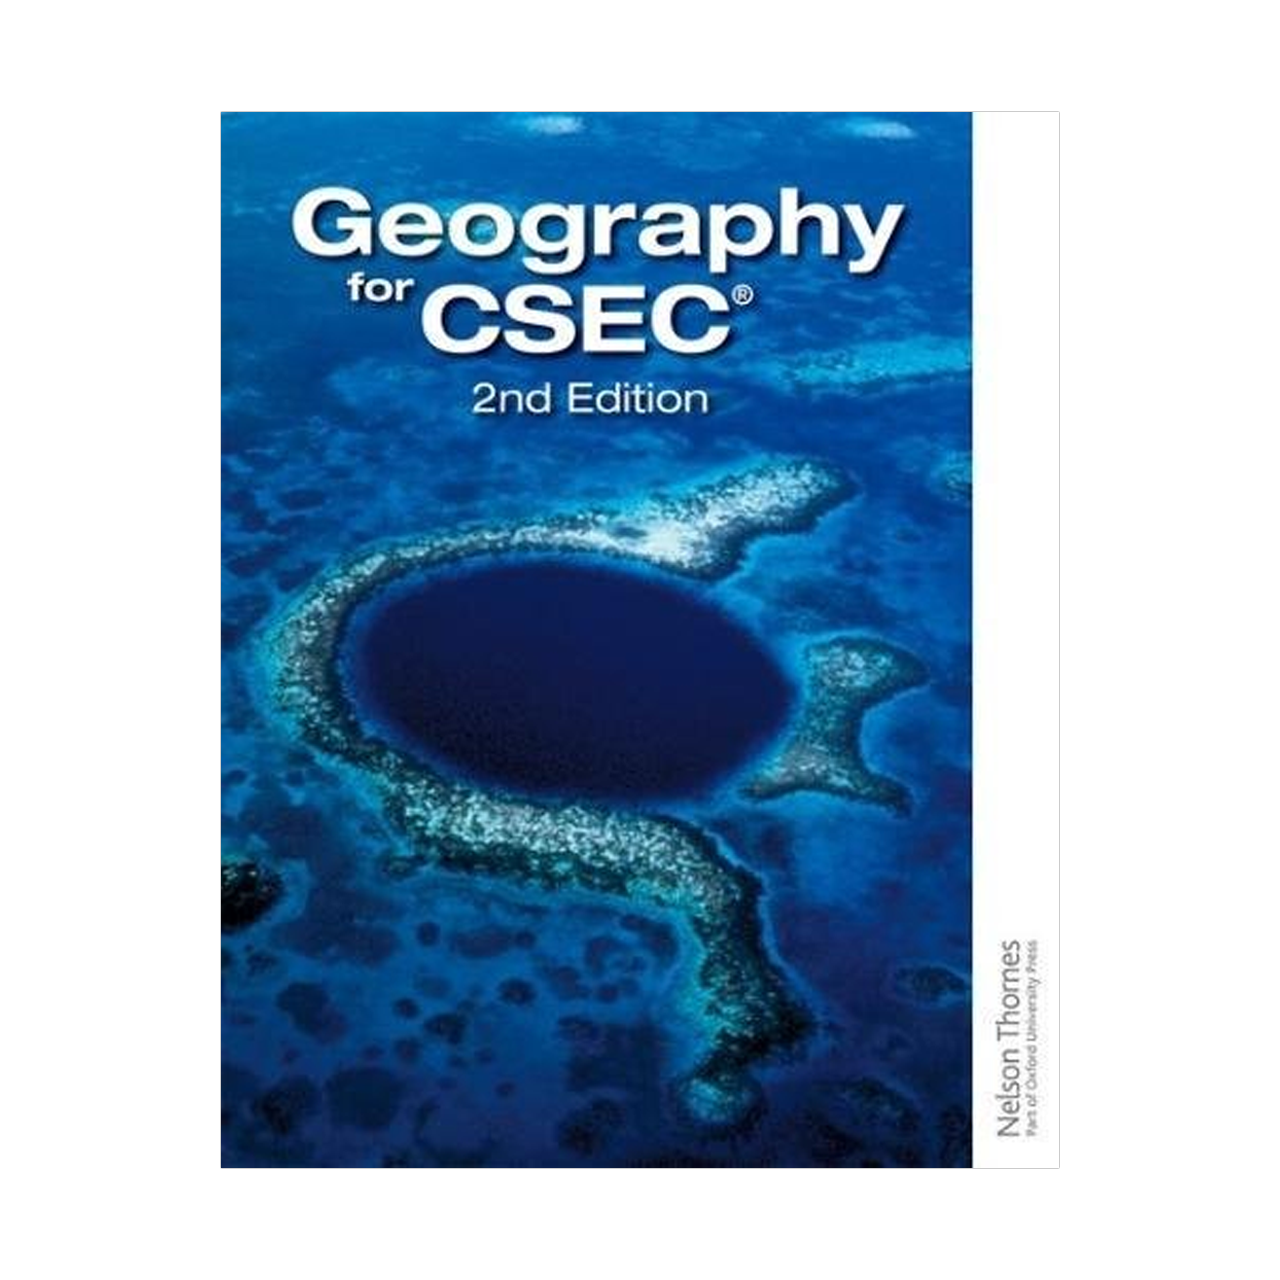 geography assignment book